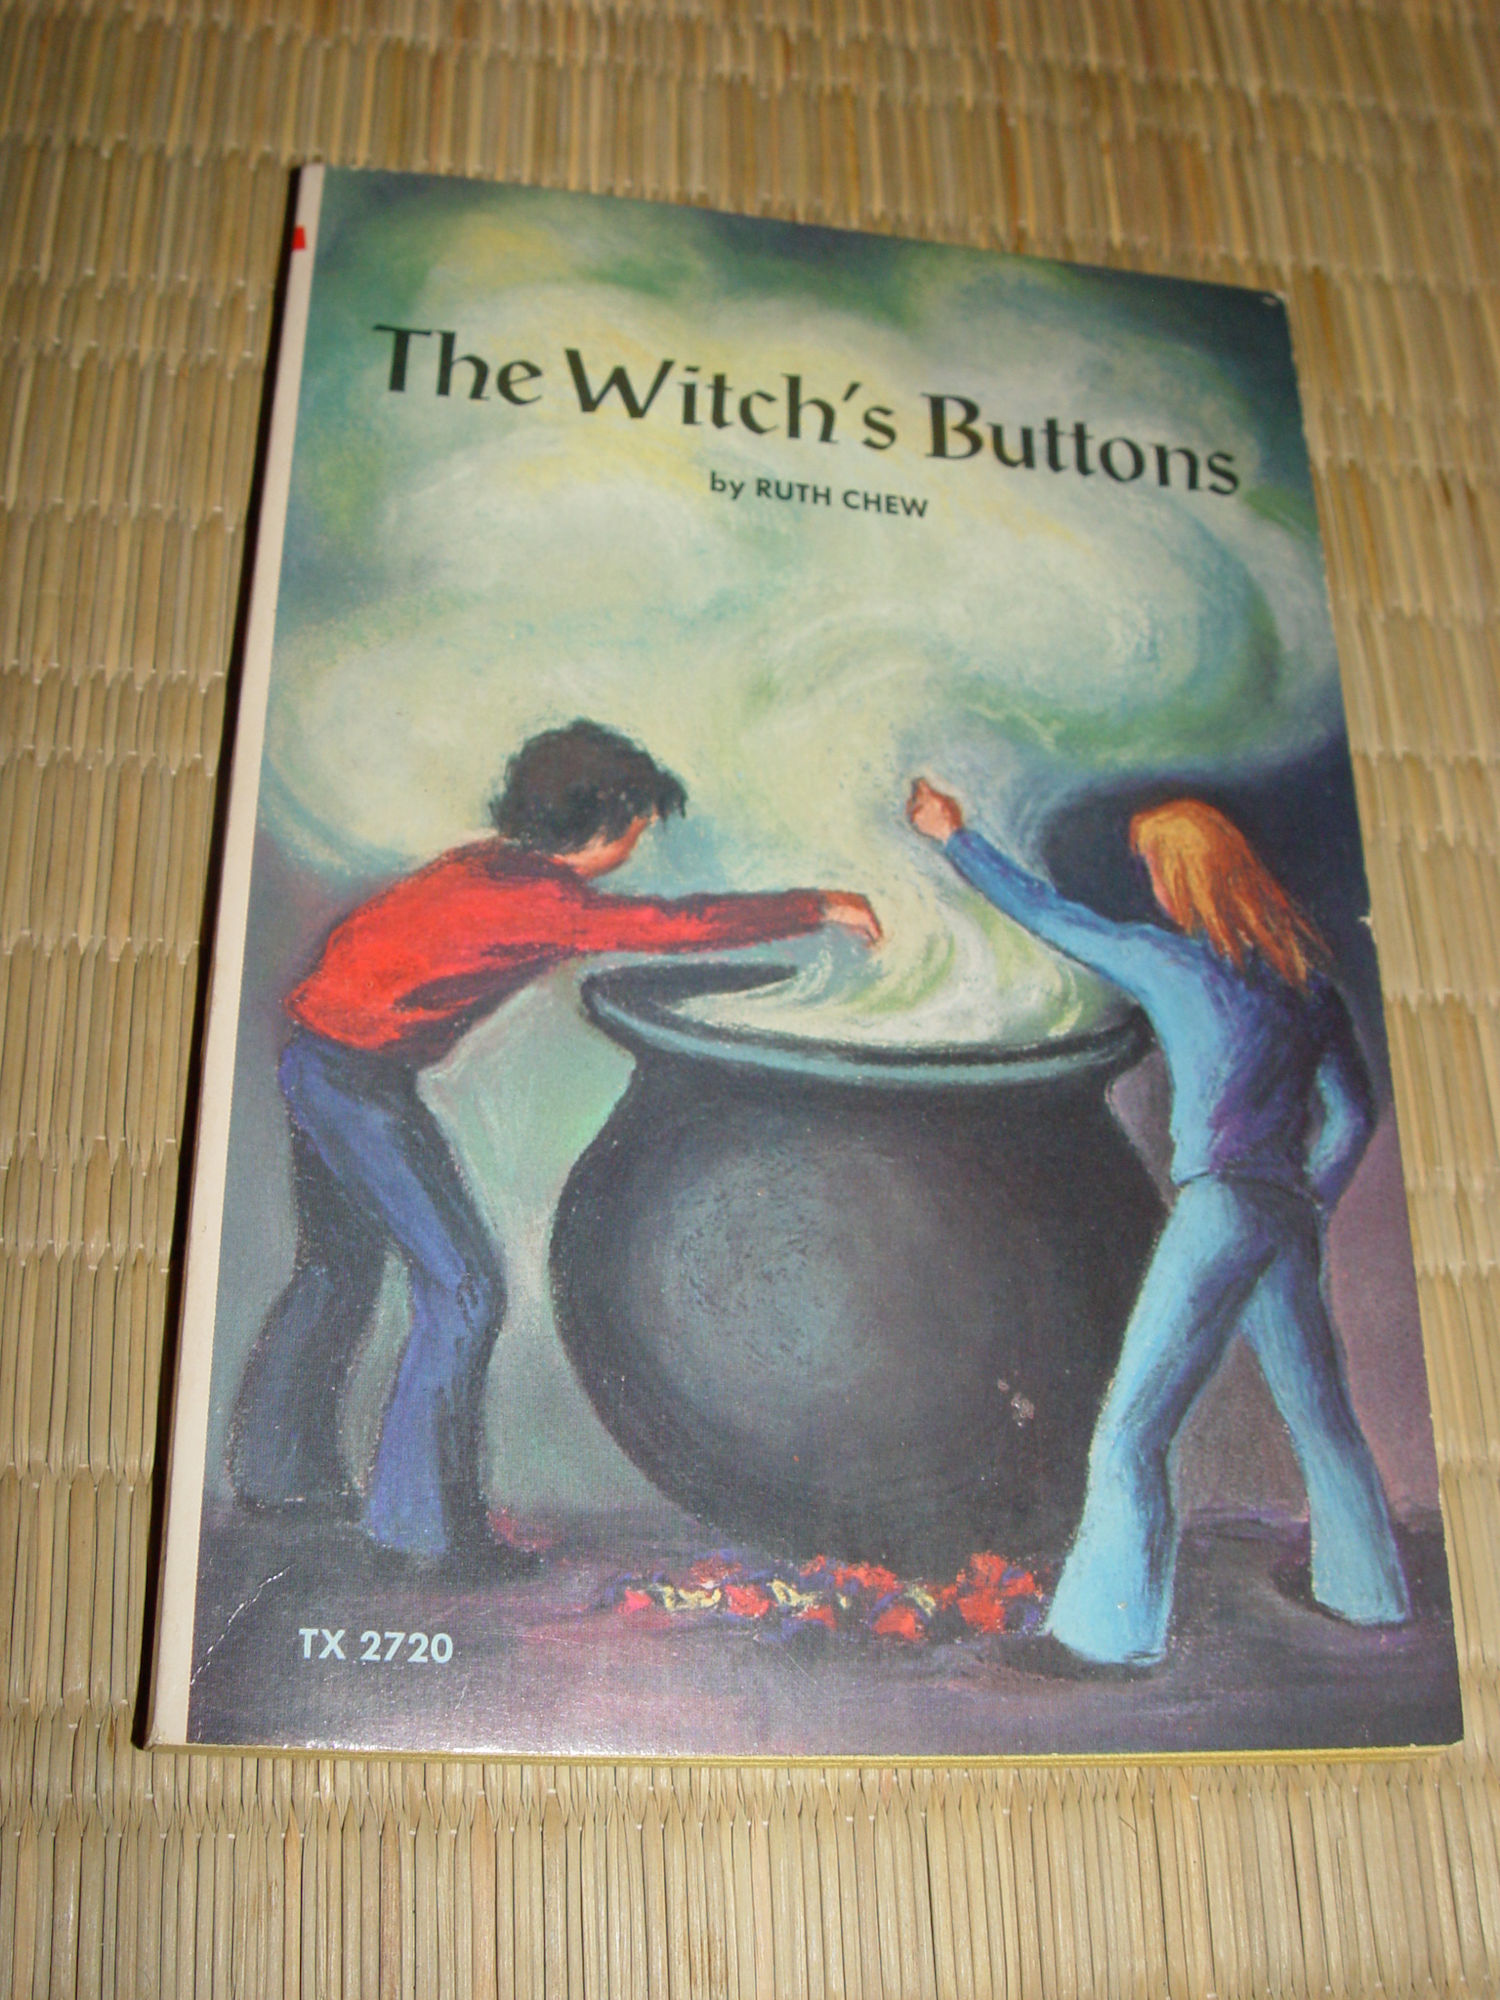 The Witch's Buttons 1974 by Ruth Chew